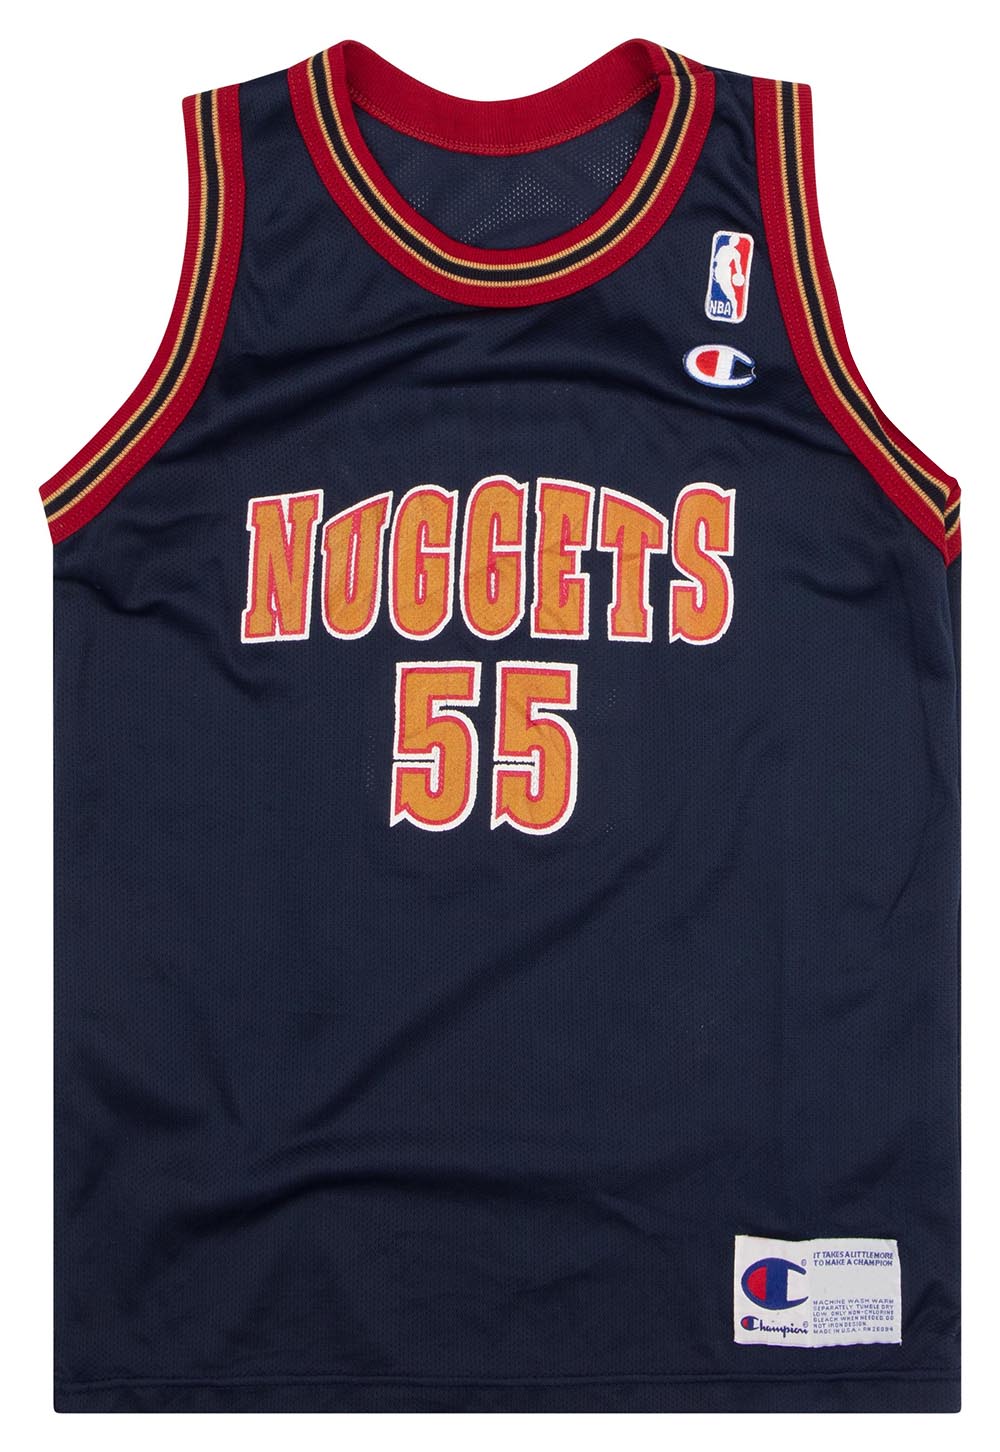 Denver Nuggets jerseys new patch for championship